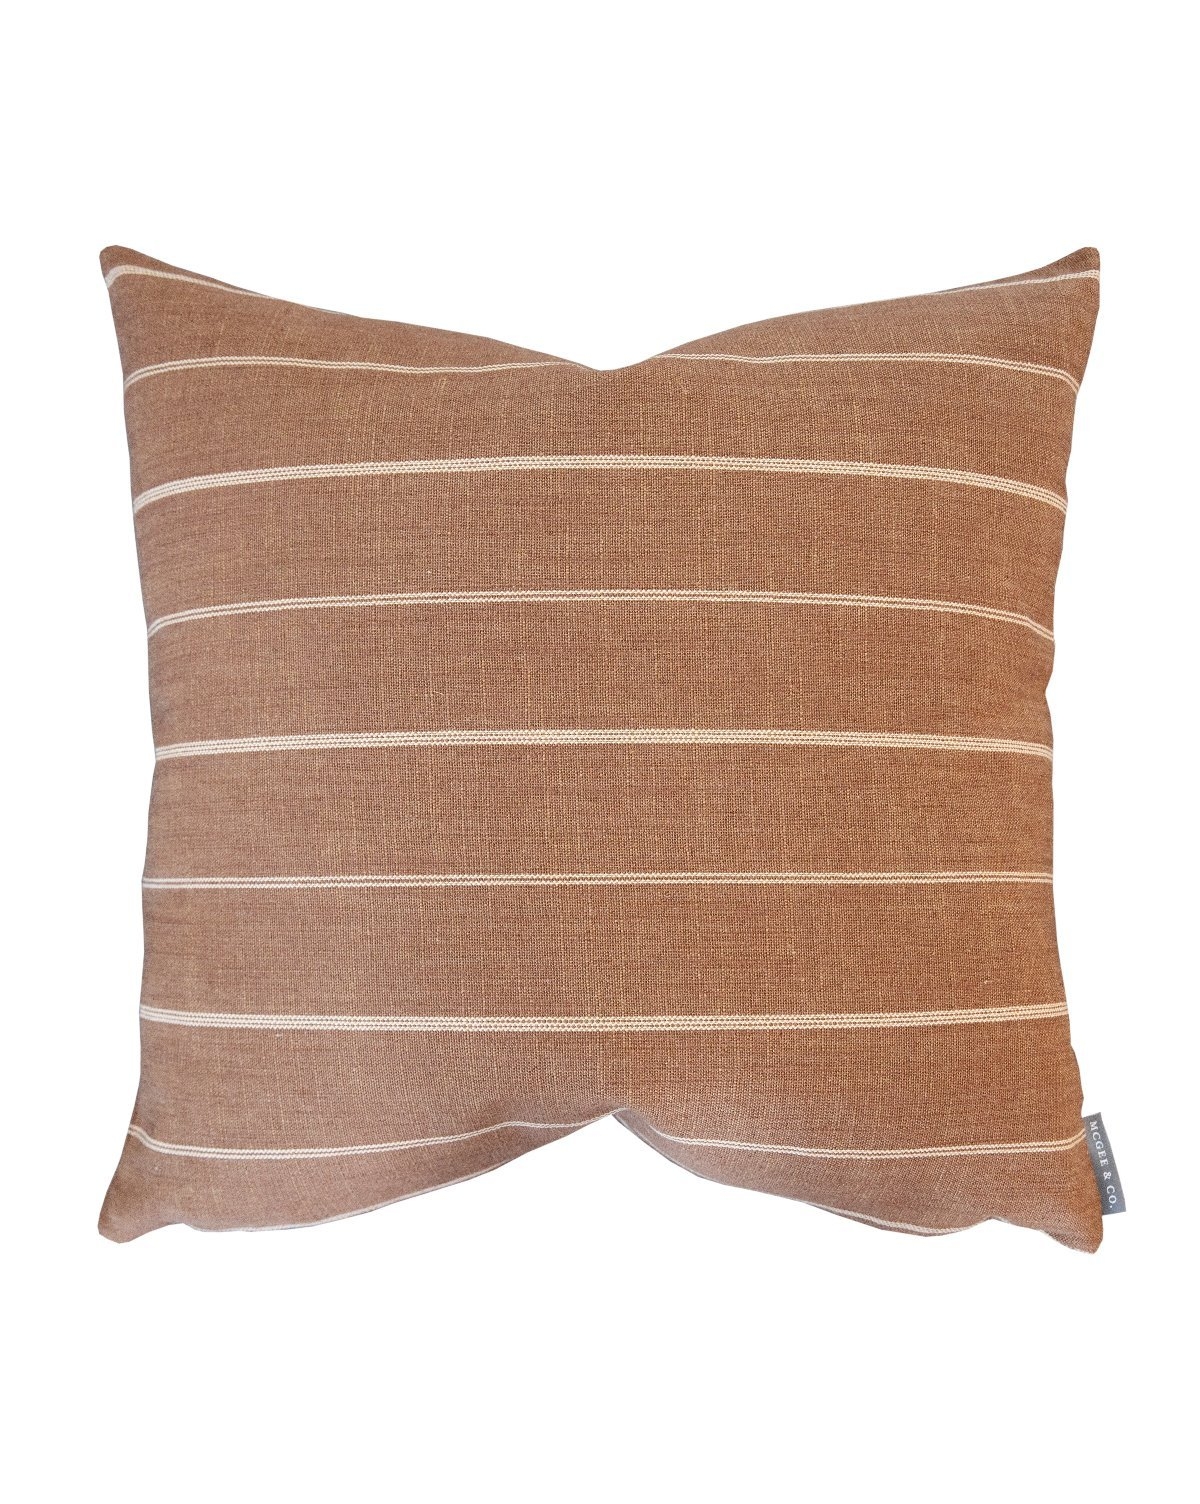 LEOPOLD PILLOW WITHOUT INSERT, 24" x 24" - Image 0